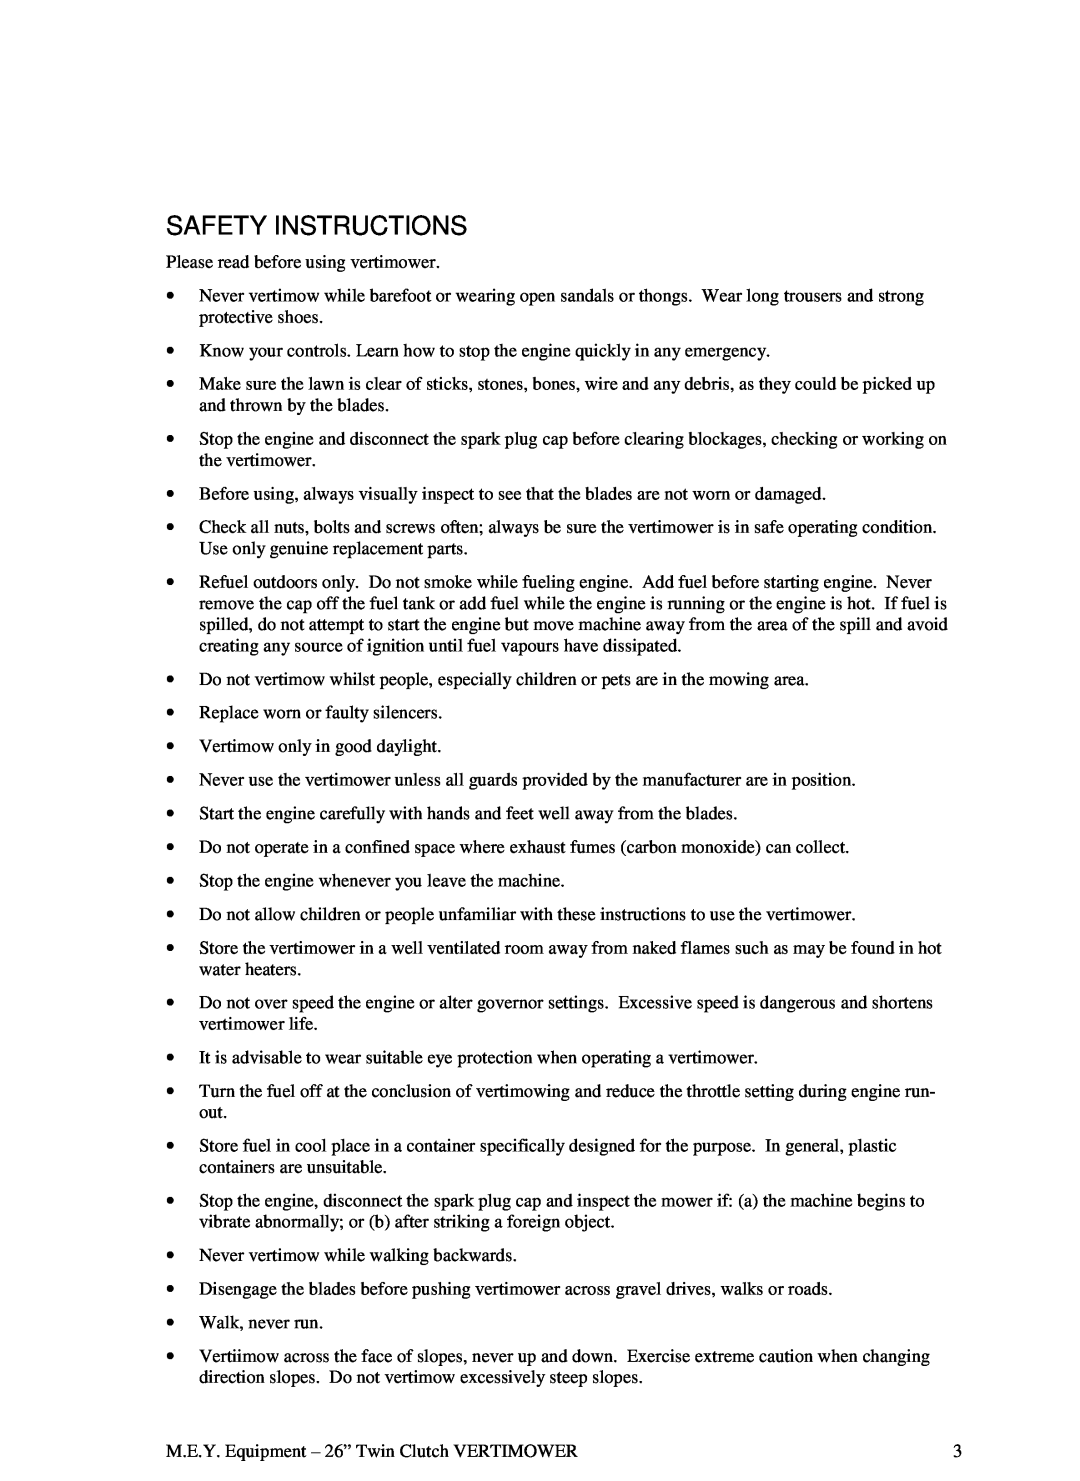 M.E.Y. Equipment 26TCVM owner manual Safety Instructions 